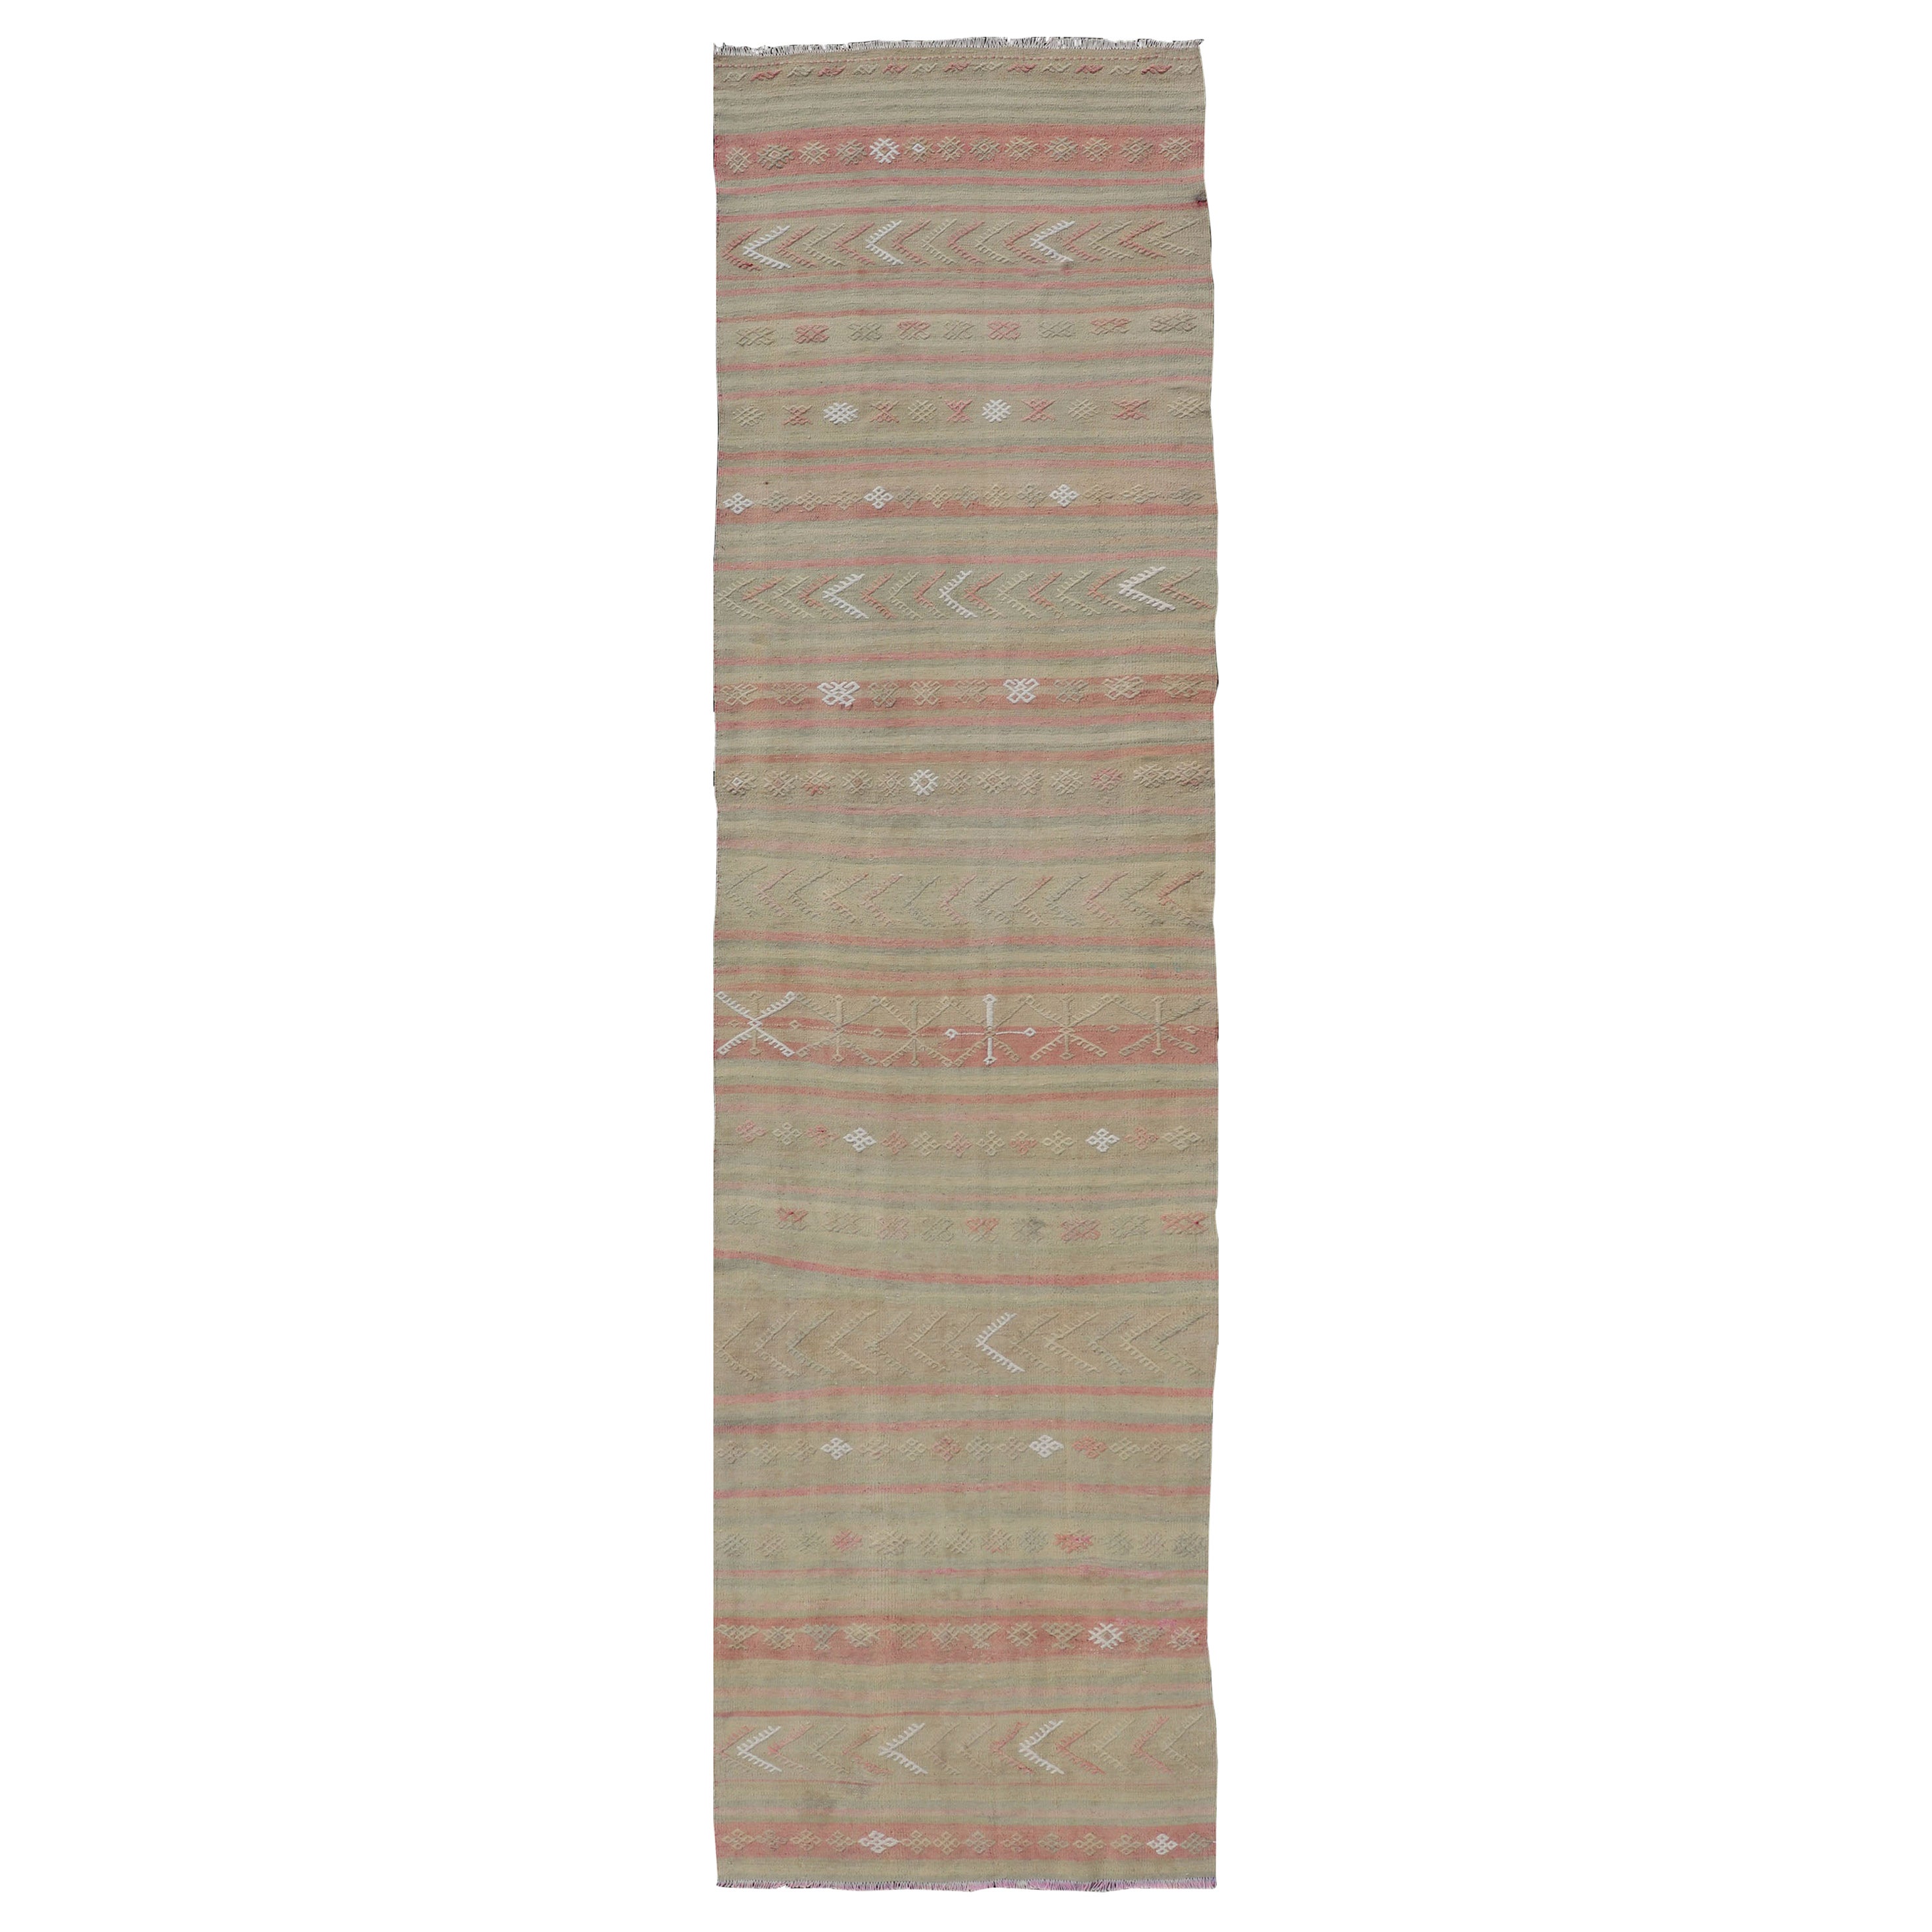 Vintage Striped Turkish Kilim Runner with Stripes in Tan, Ivory, & Light Coral For Sale